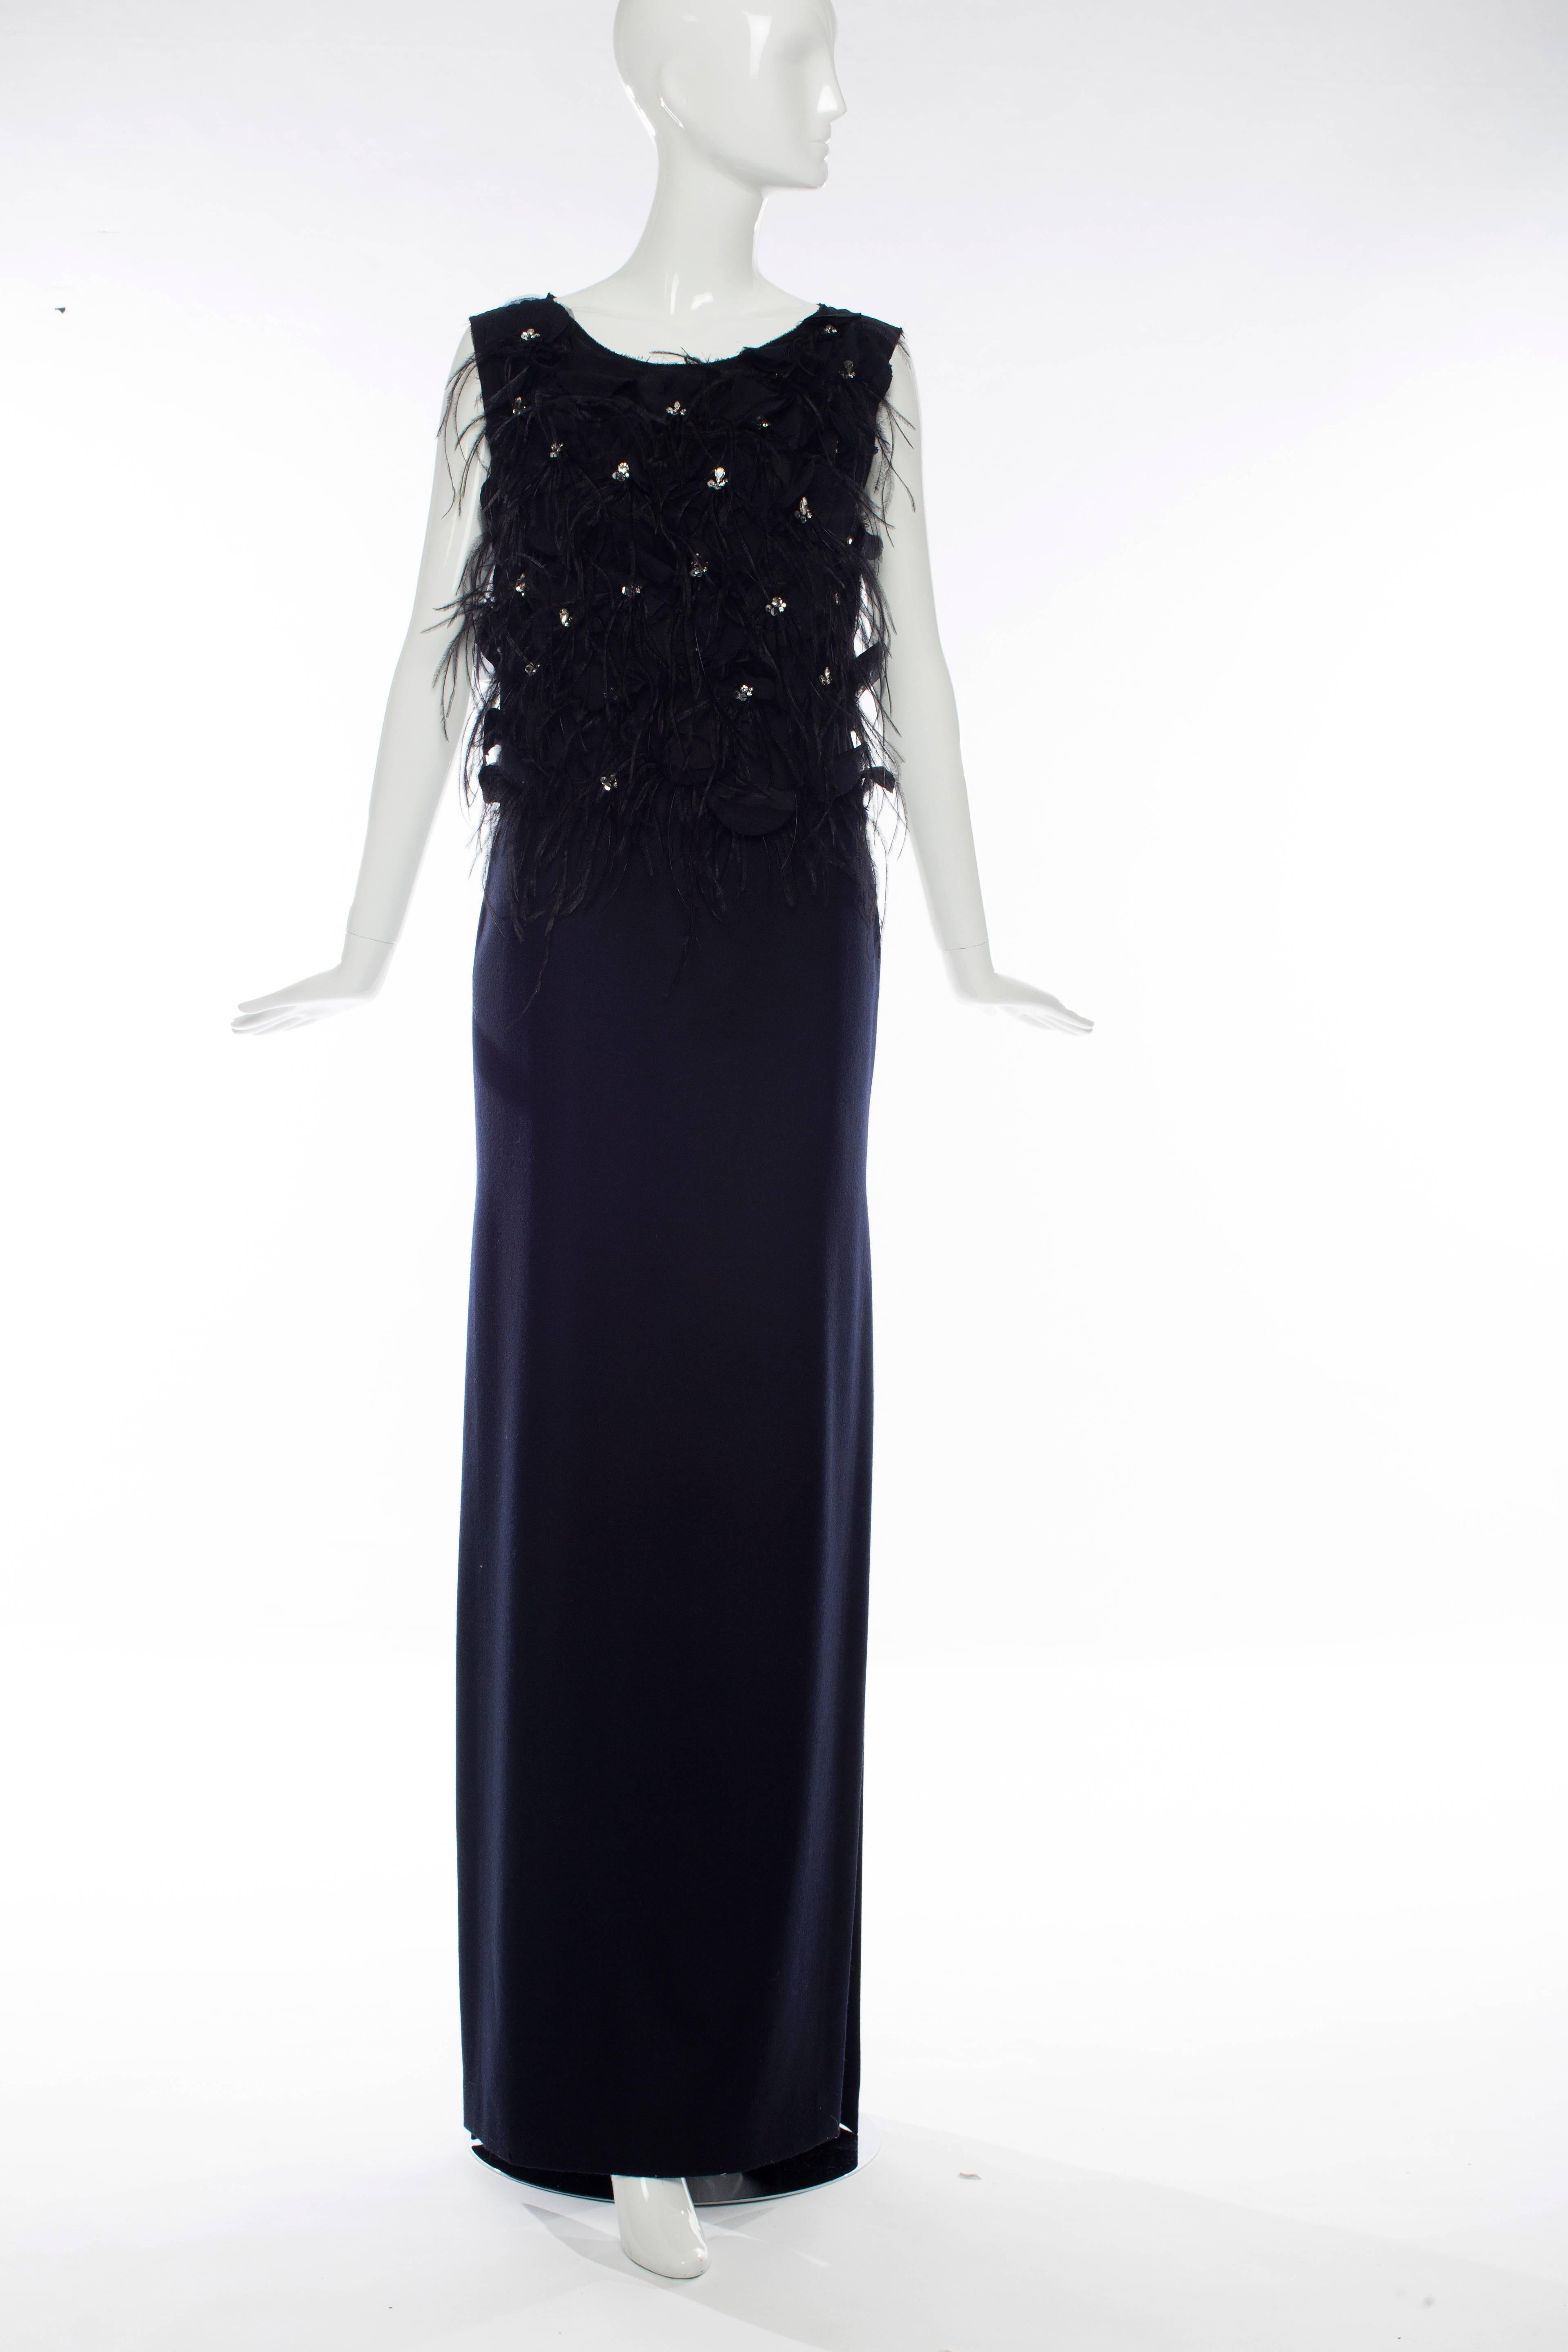 Dries Van Noten, Fall circa 2013, navy blue wool and black silk chiffon sleeveless evening dress, feather and prong set crystal and sequin embellished bodice, sheer back, skirt has slit at sides with two front pockets and fully lined.